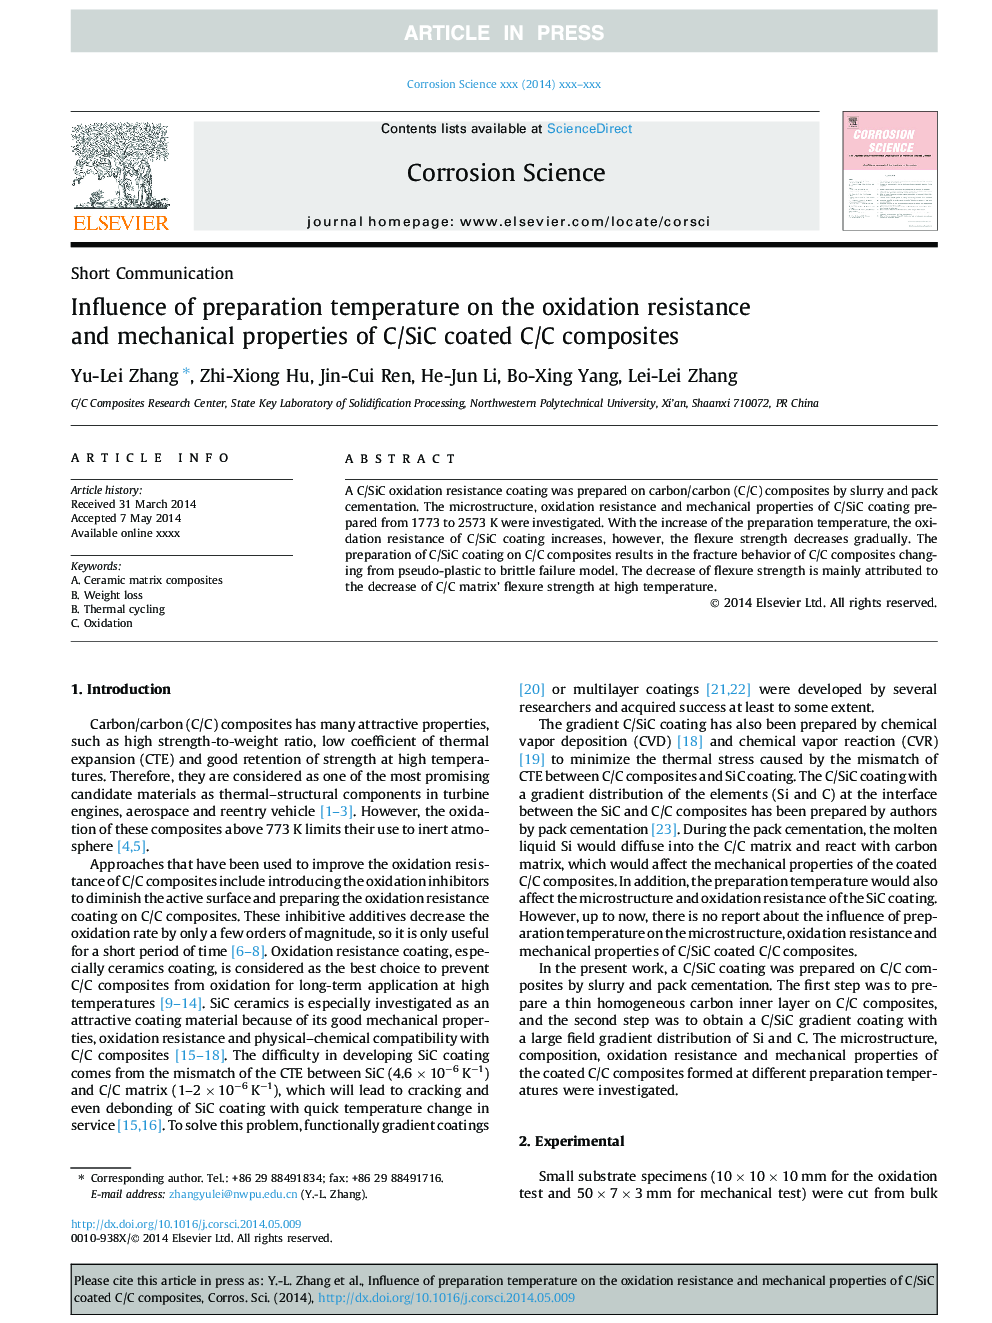 Influence of preparation temperature on the oxidation resistance and mechanical properties of C/SiC coated C/C composites